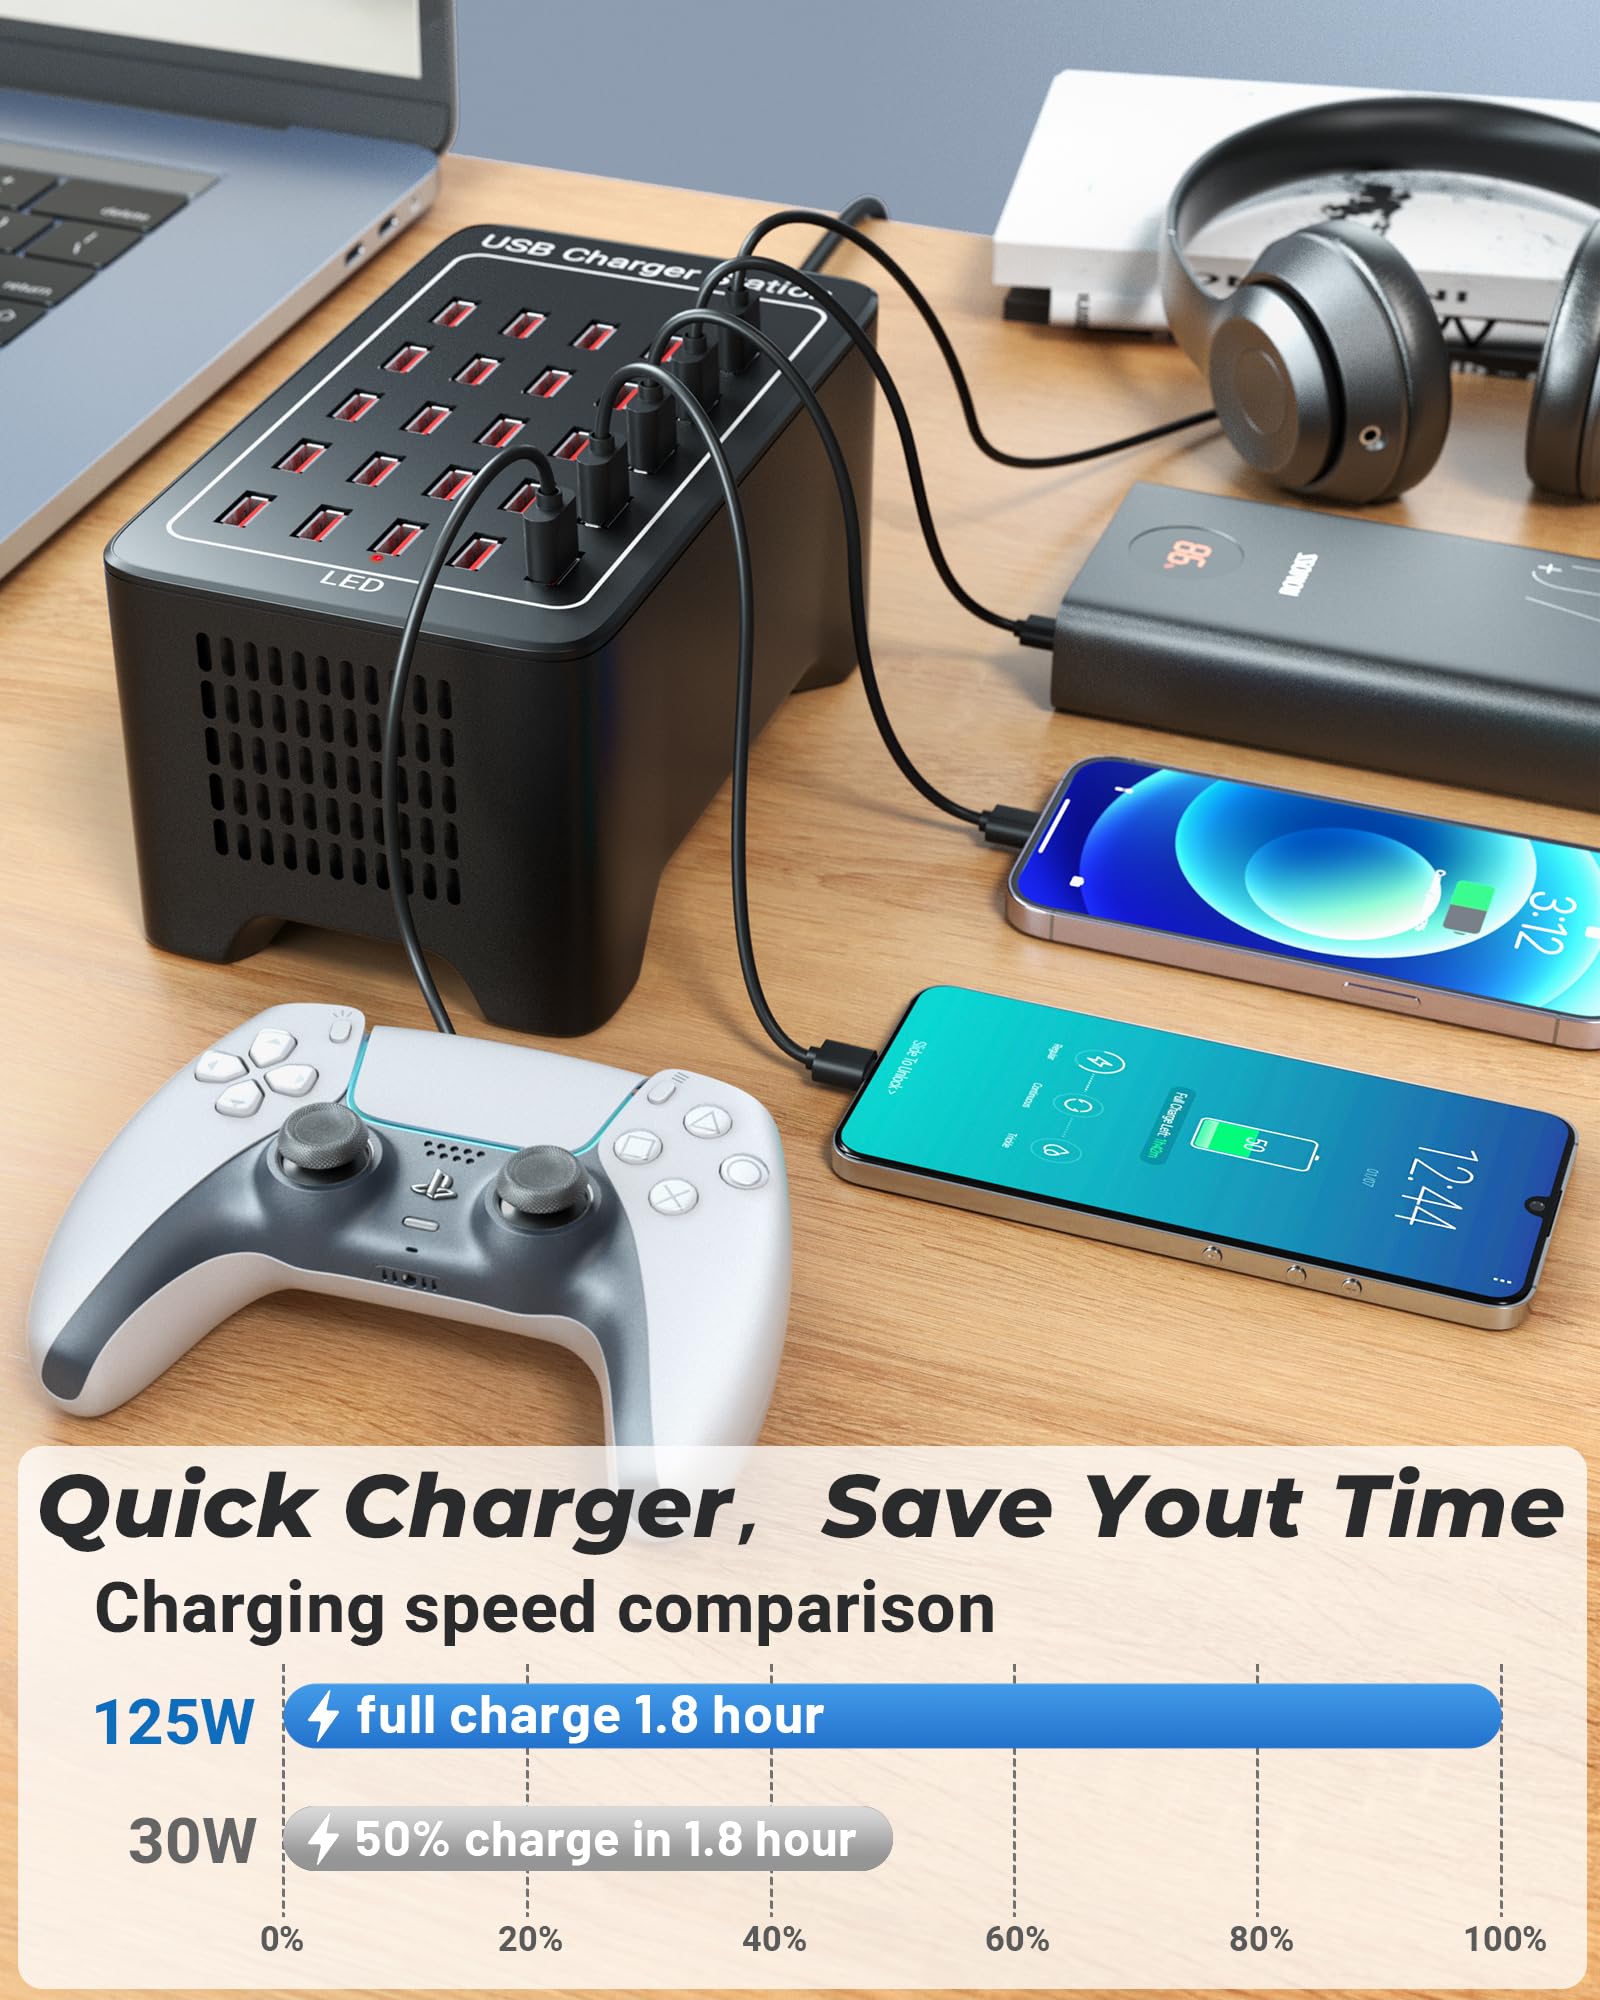 USB Charging Station, 25 Port 125W(25A), Travel Desktop USB Rapid Charger, Multi Ports Fast Charging Station Organizer Compatible with Smartphones, Tables, and More Devices